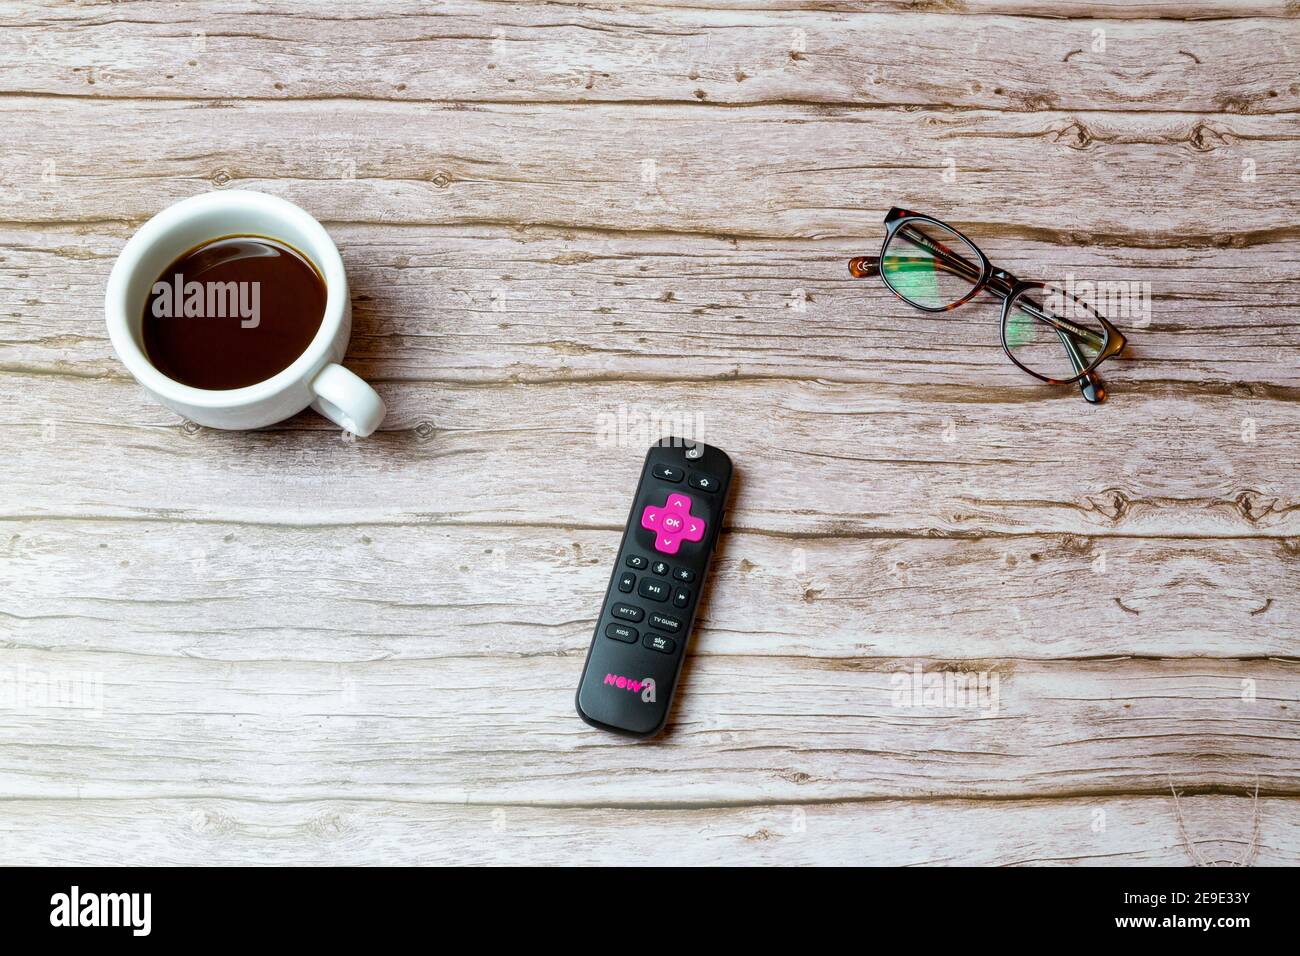 02-04-2021 Portsmouth, Hampshire, UK A Pink Now TV remote control laid on a table or desk next to glasses and a coffee Stock Photo